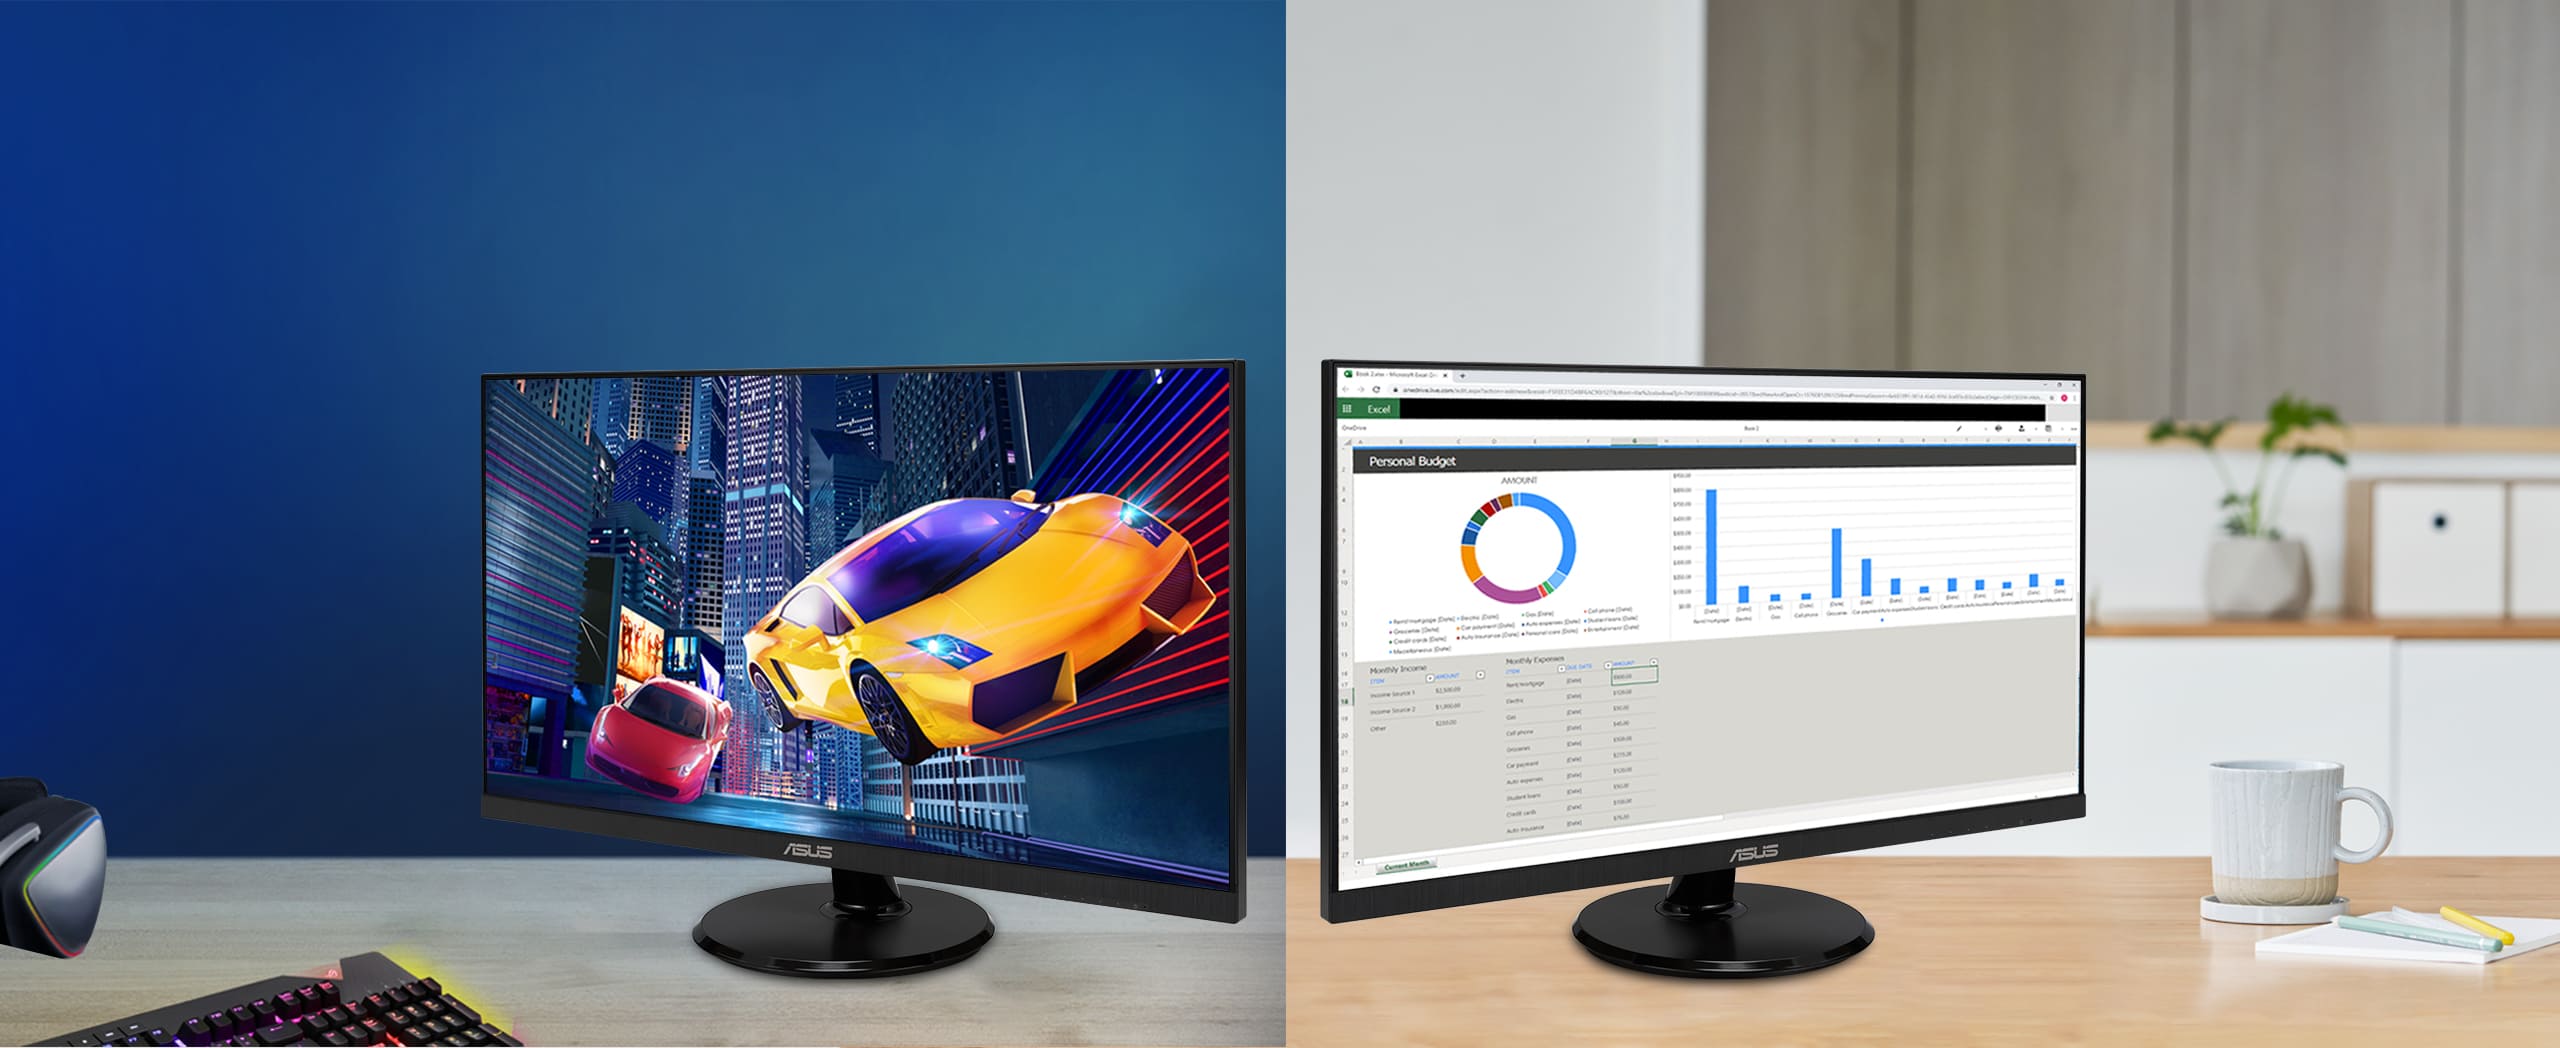 ASUS VA27DQF is 27-inch IPS Eye Care Gaming monitor with fast 100Hz refresh rate and Adaptive-Sync technology to eliminate screen tearing and choppy frame rates for the smoother-than-ever experience.